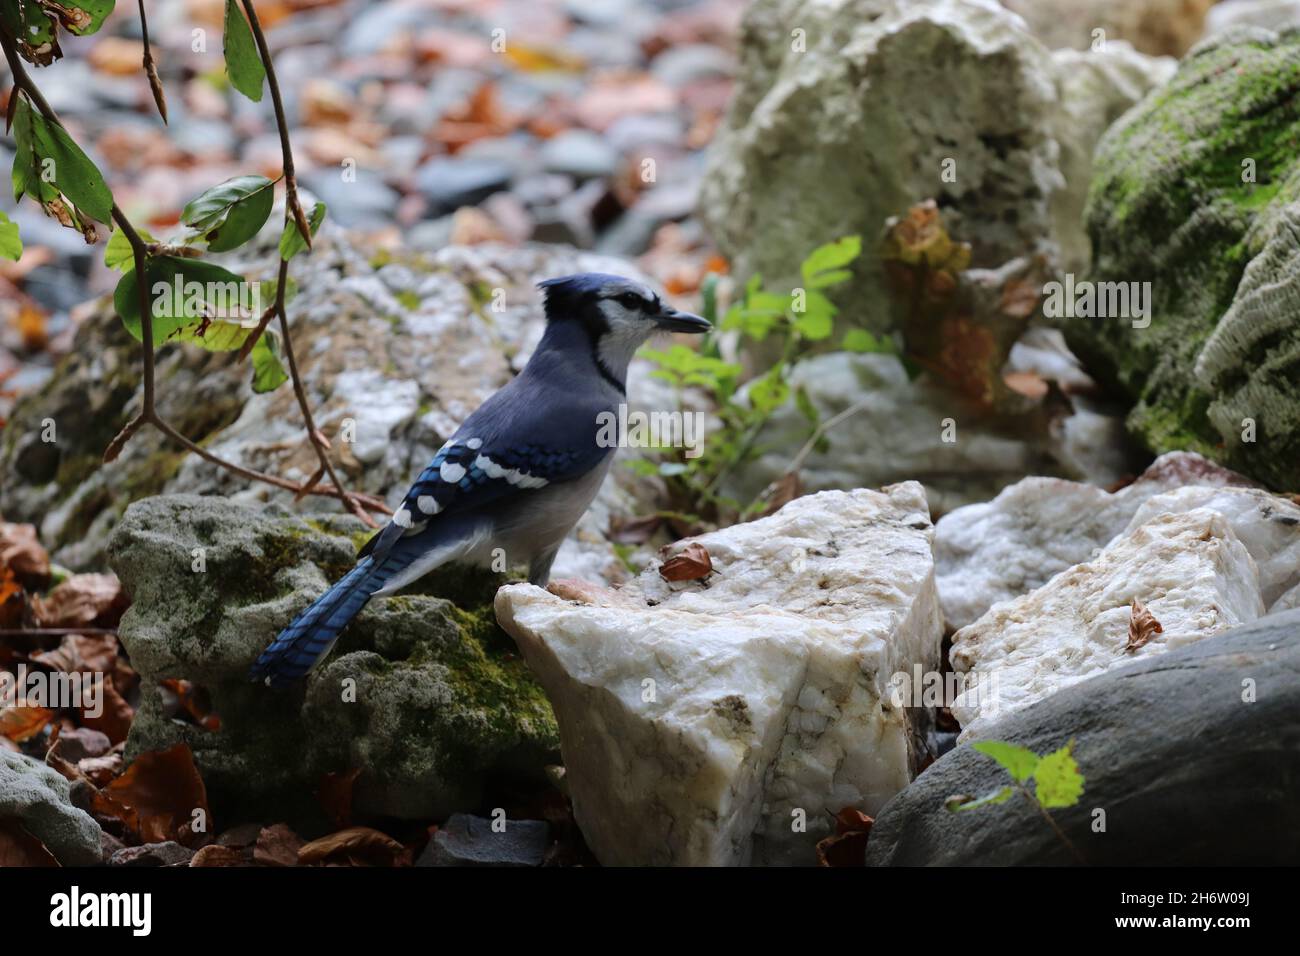 Closeup shot of a blue jay perched on a rock in Halifax, Germany Stock Photo